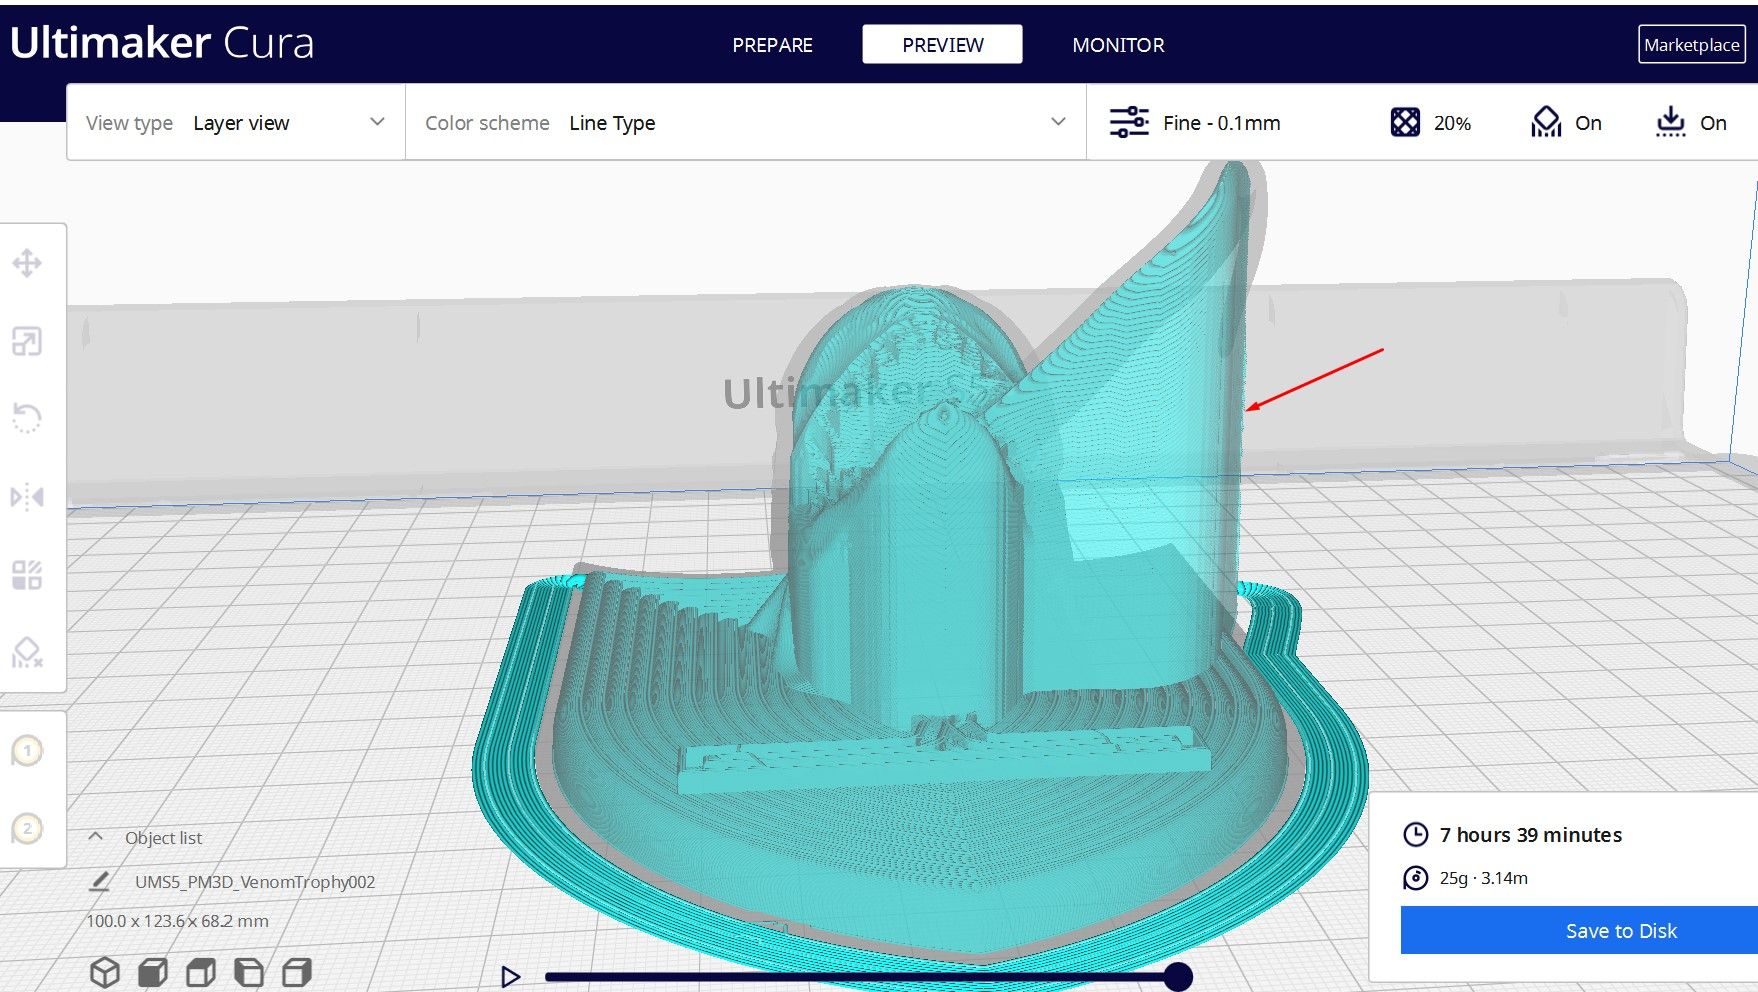 3D printing supports added to one section of a model